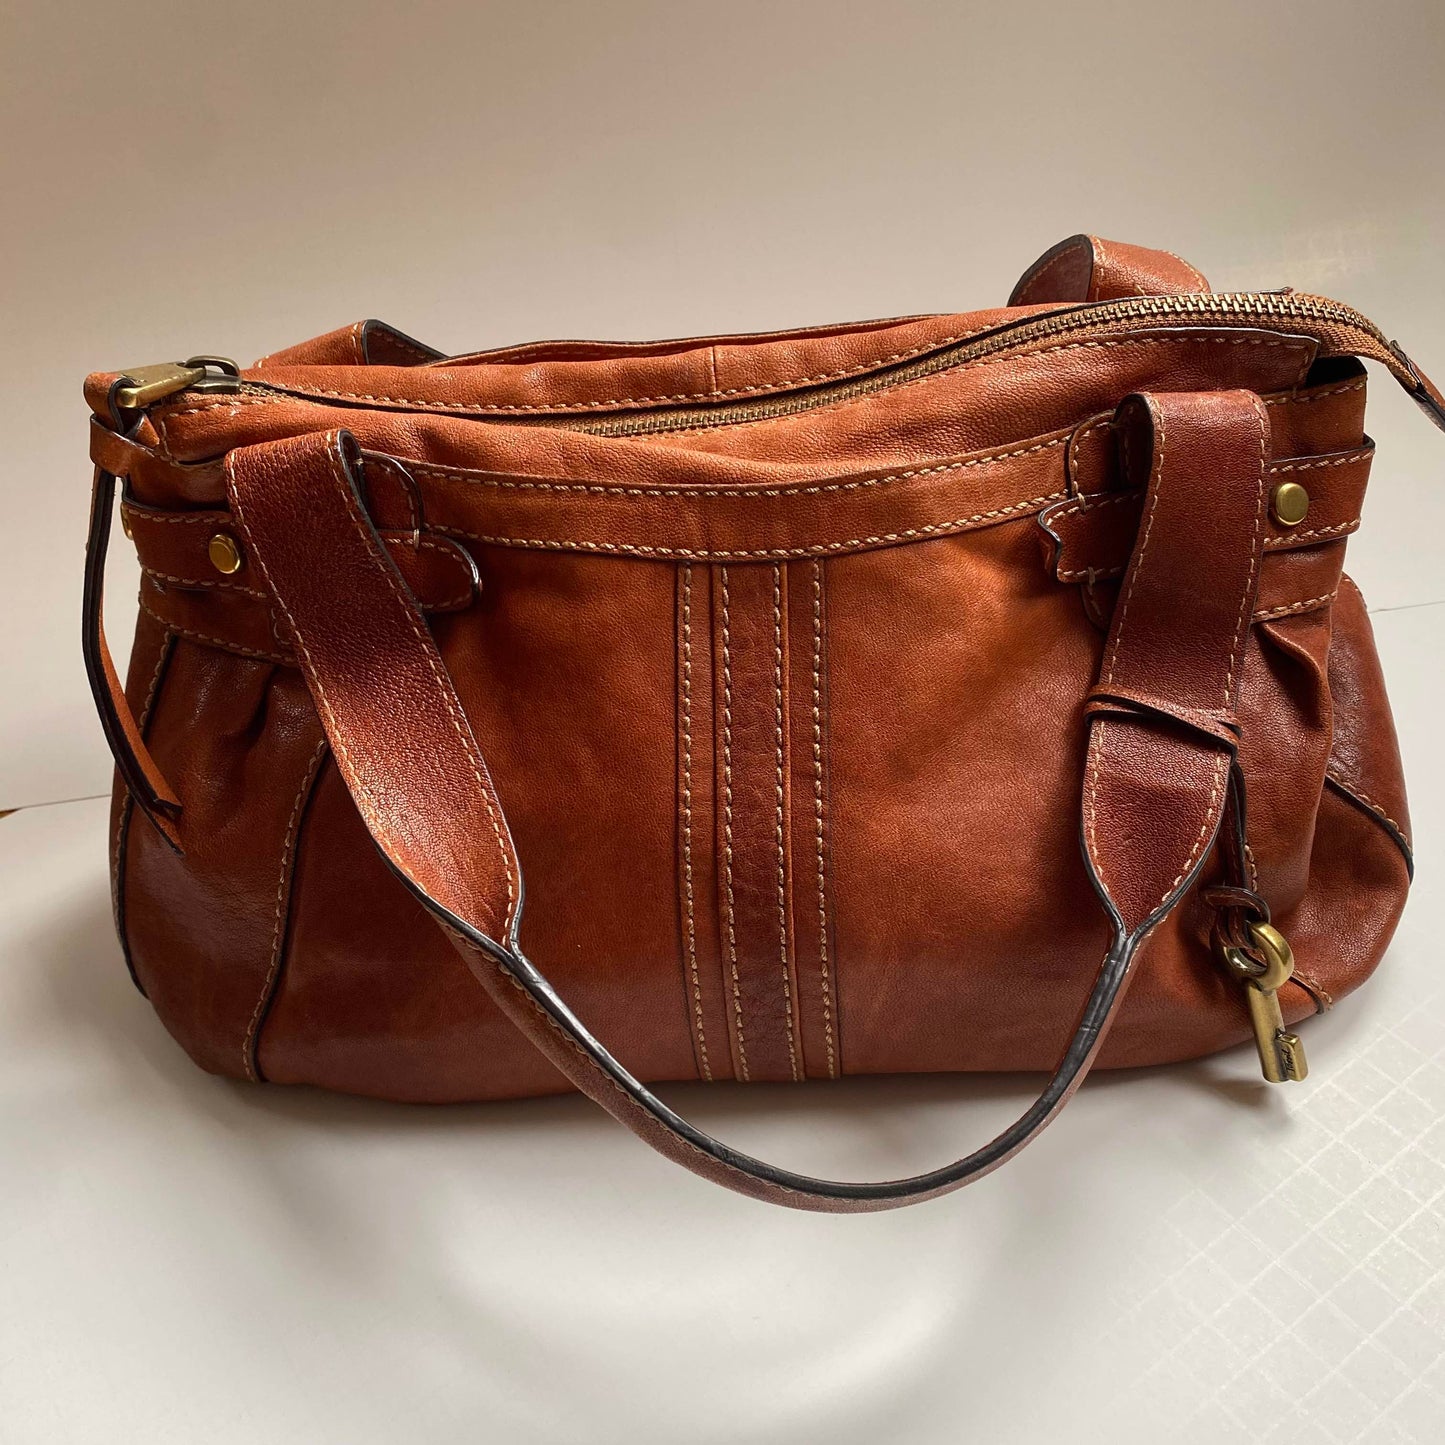 Fossil brown leather bag